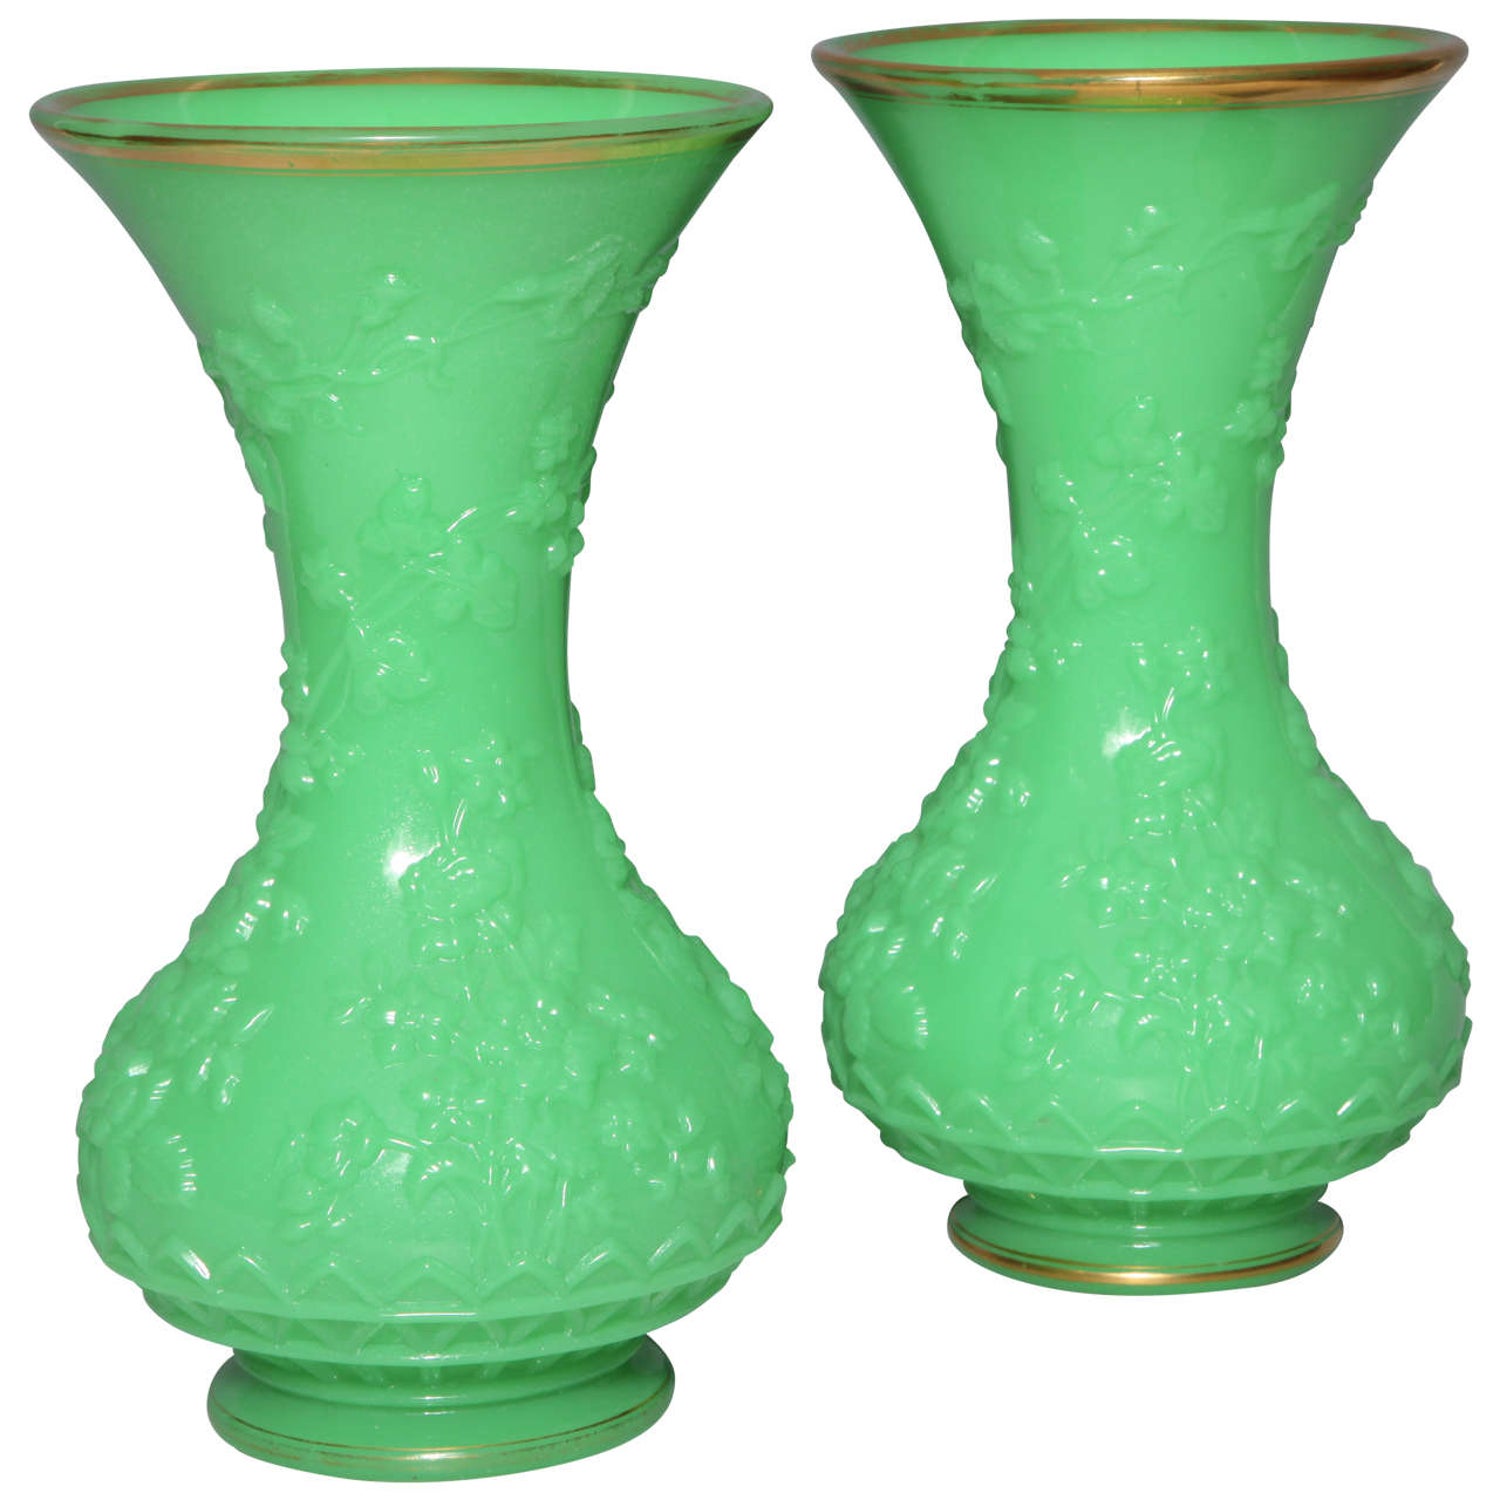 Pair of French Baluster Shaped Opaline Glass Vases Attributed to "Baccarat"  For Sale at 1stDibs